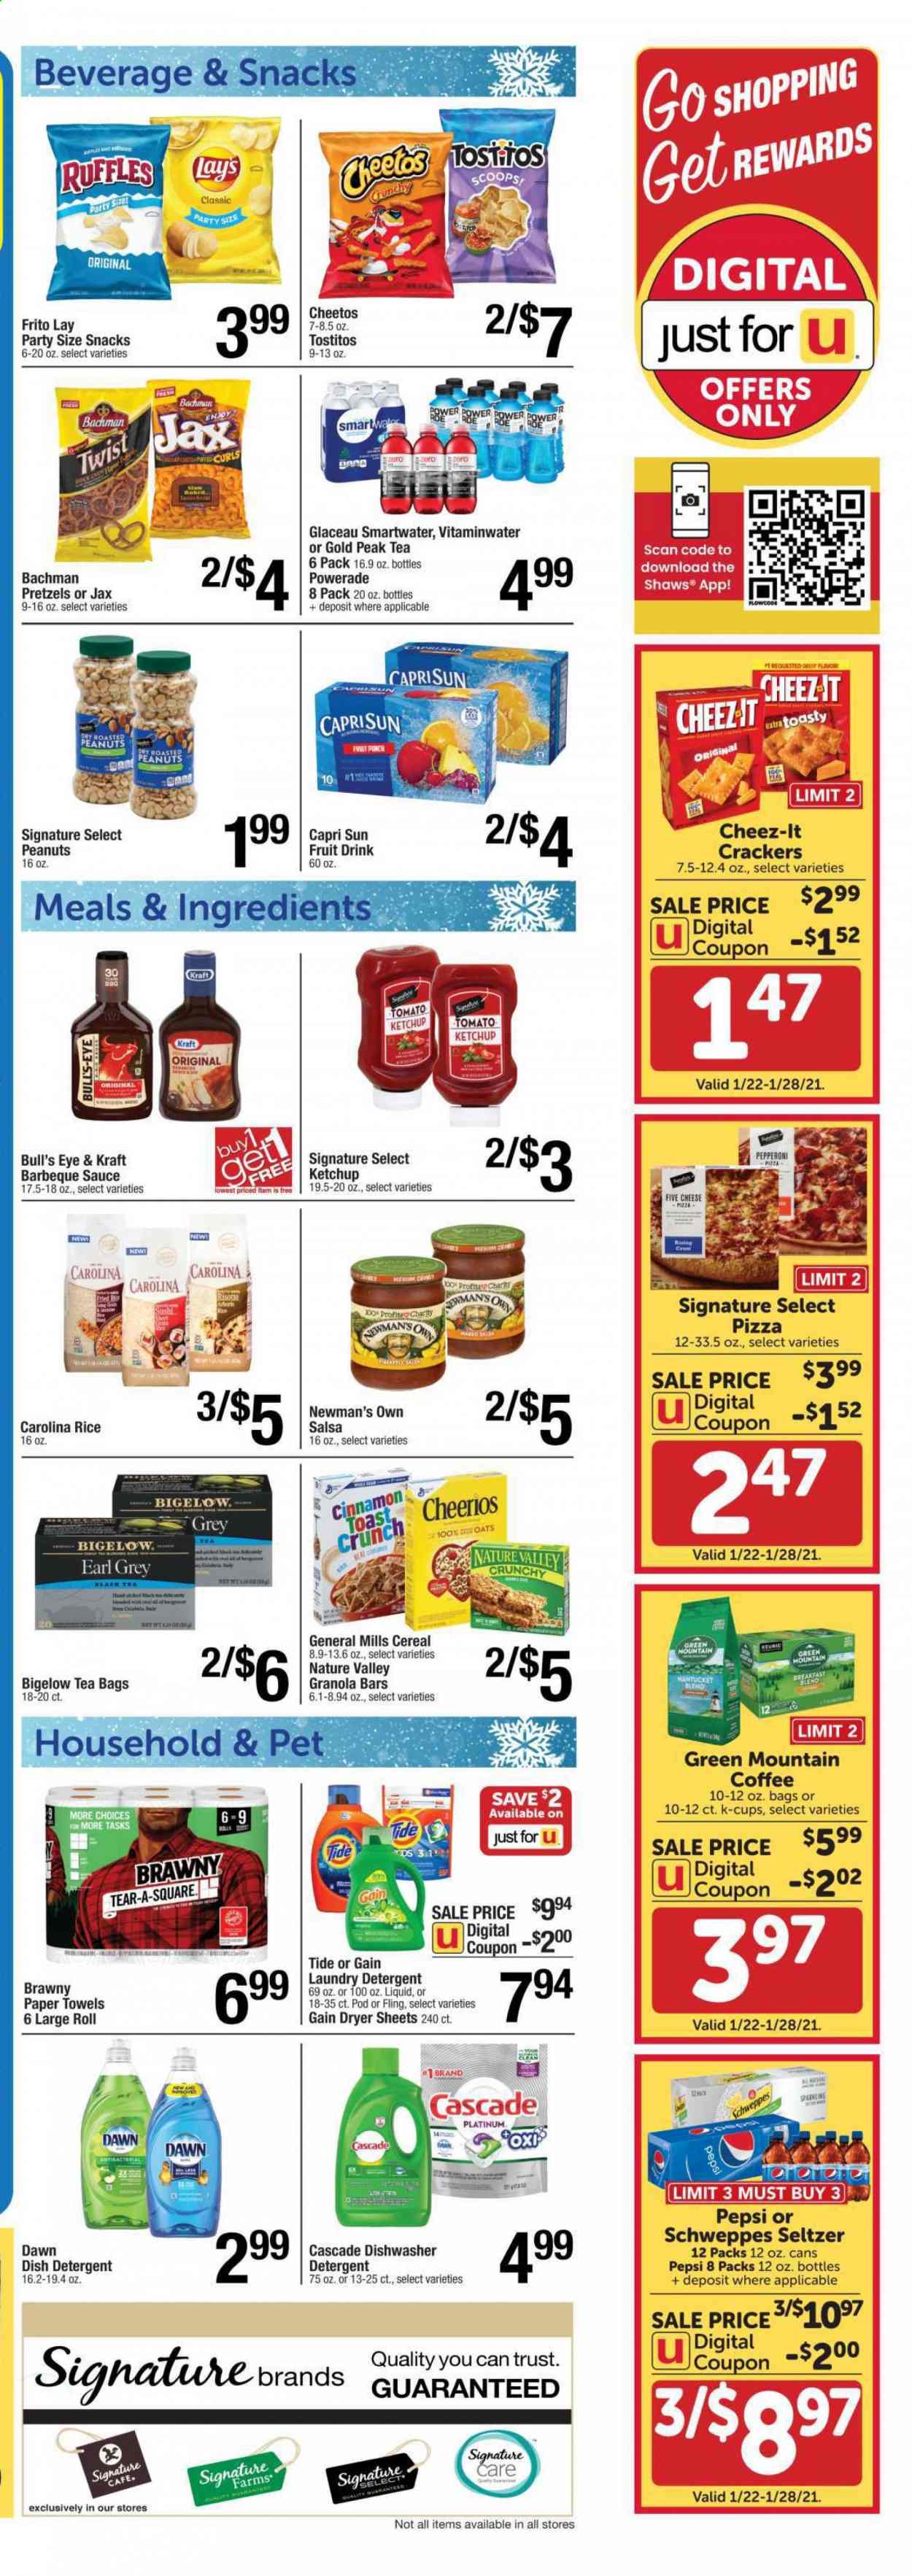 thumbnail - Shaw’s Flyer - 01/22/2021 - 01/28/2021 - Sales products - pretzels, toast bread, pizza, Kraft®, pepperoni, cheese, salsa, crackers, Cheetos, snack, Lay’s, Cheez-It, Ruffles, Tostitos, oats, cereals, Cheerios, granola bar, Nature Valley, rice, cinnamon, BBQ sauce, ketchup, roasted peanuts, peanuts, Capri Sun, Schweppes, Powerade, Pepsi, fruit drink, Gold Peak Tea, seltzer water, tea bags, coffee, coffee capsules, K-Cups, Green Mountain, kitchen towels, paper towels, detergent, Gain, Cascade, Tide, laundry detergent, dryer sheets, Trust. Page 3.